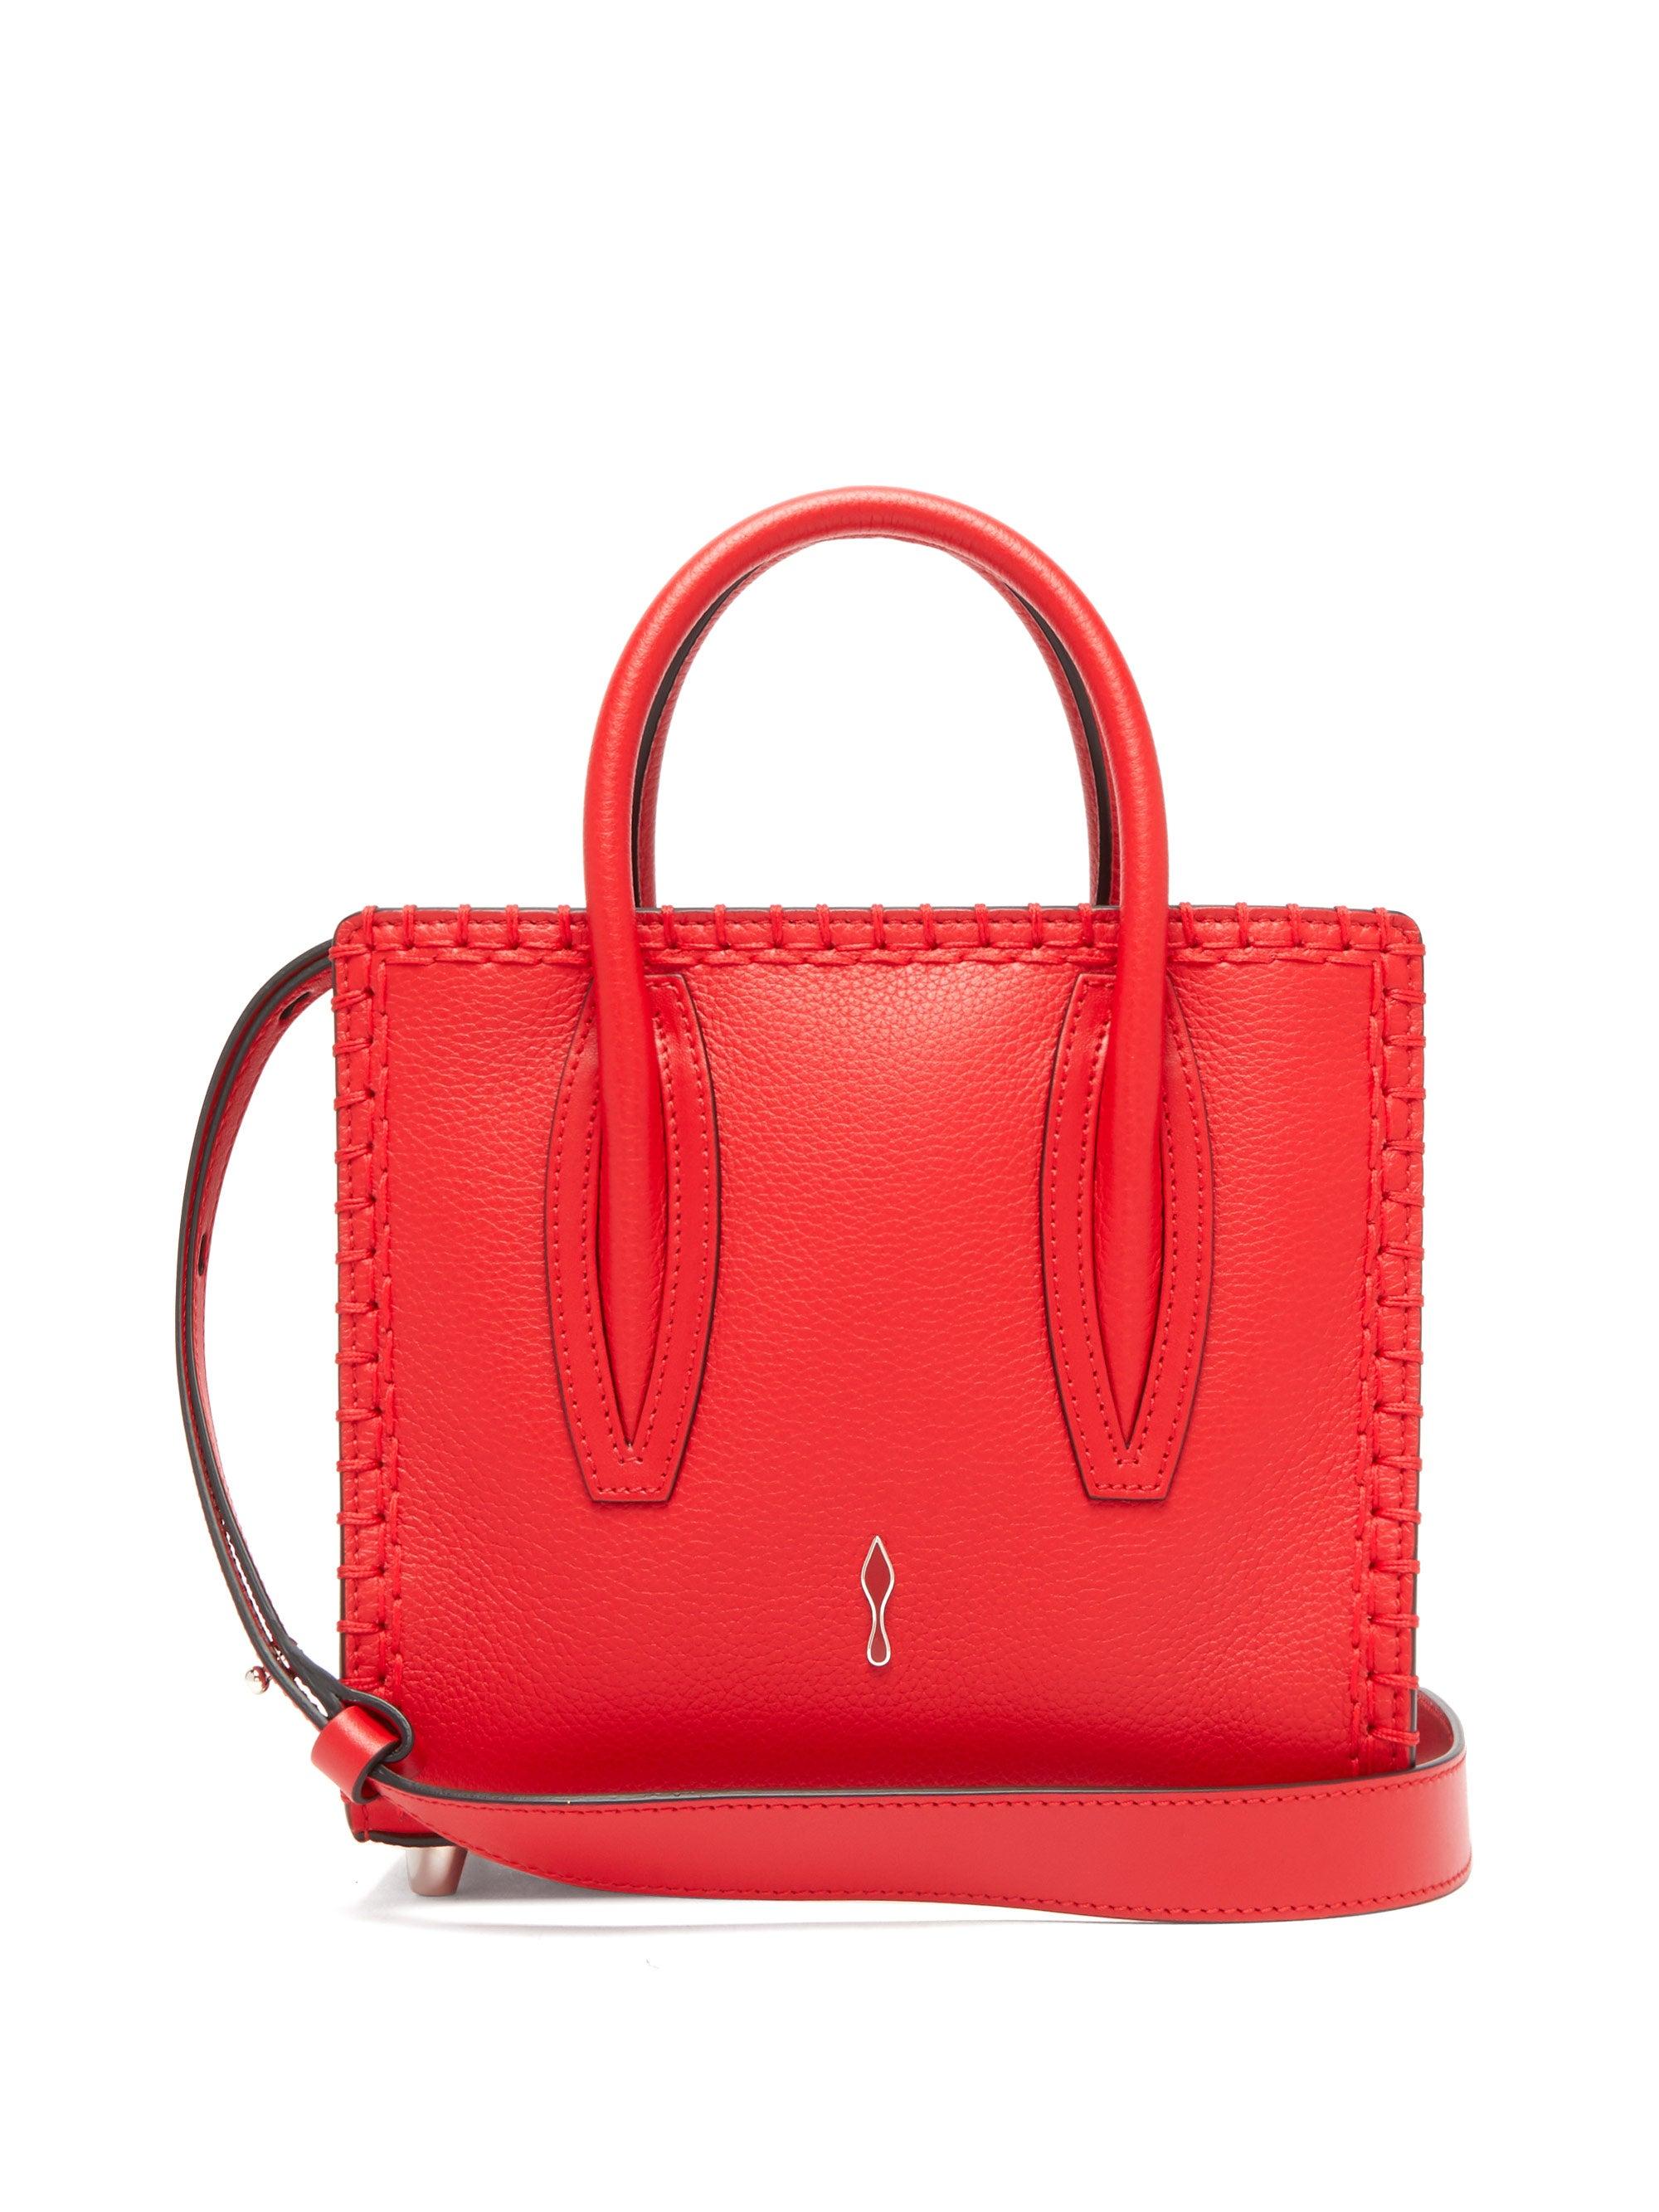 Christian Louboutin Paloma Suede And Leather Shoulder Bag in 